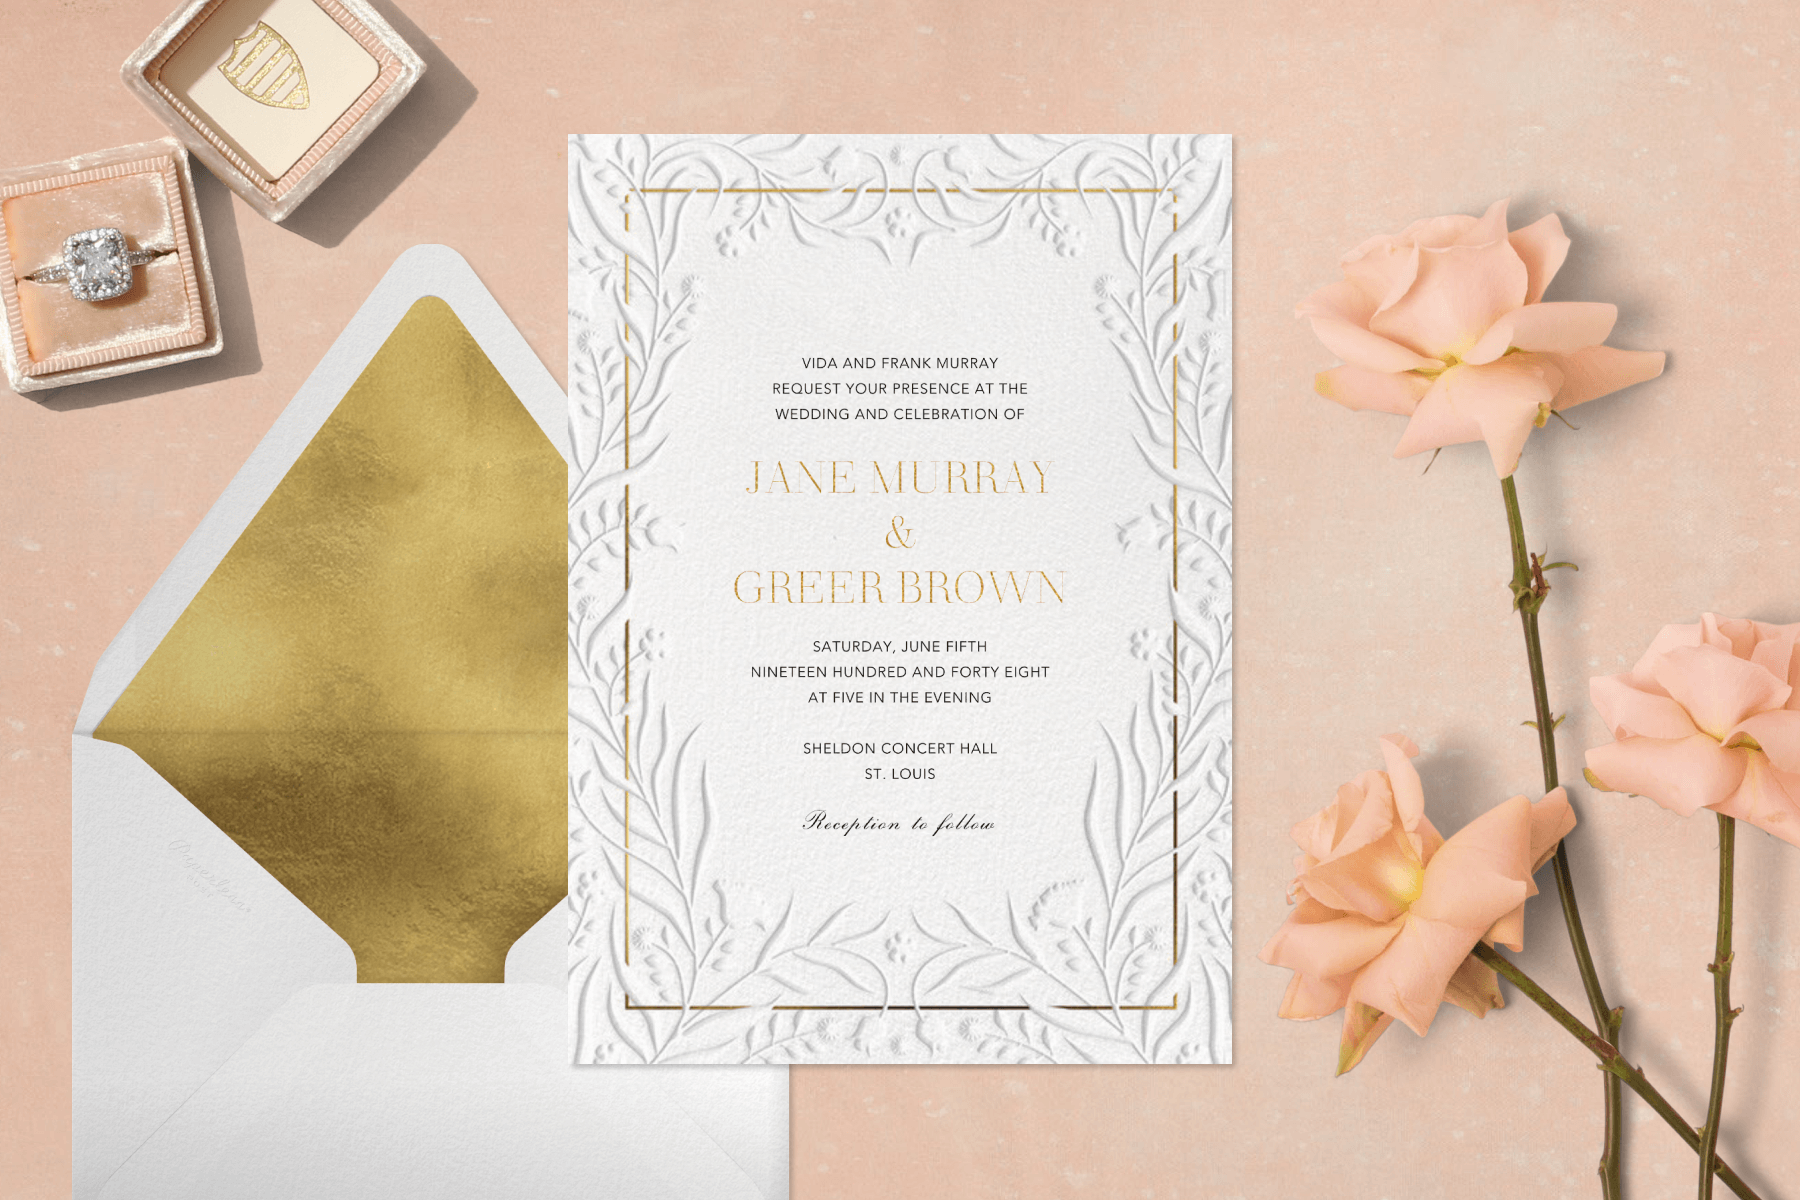 10 wedding invitation ideas that'll have your guests counting down